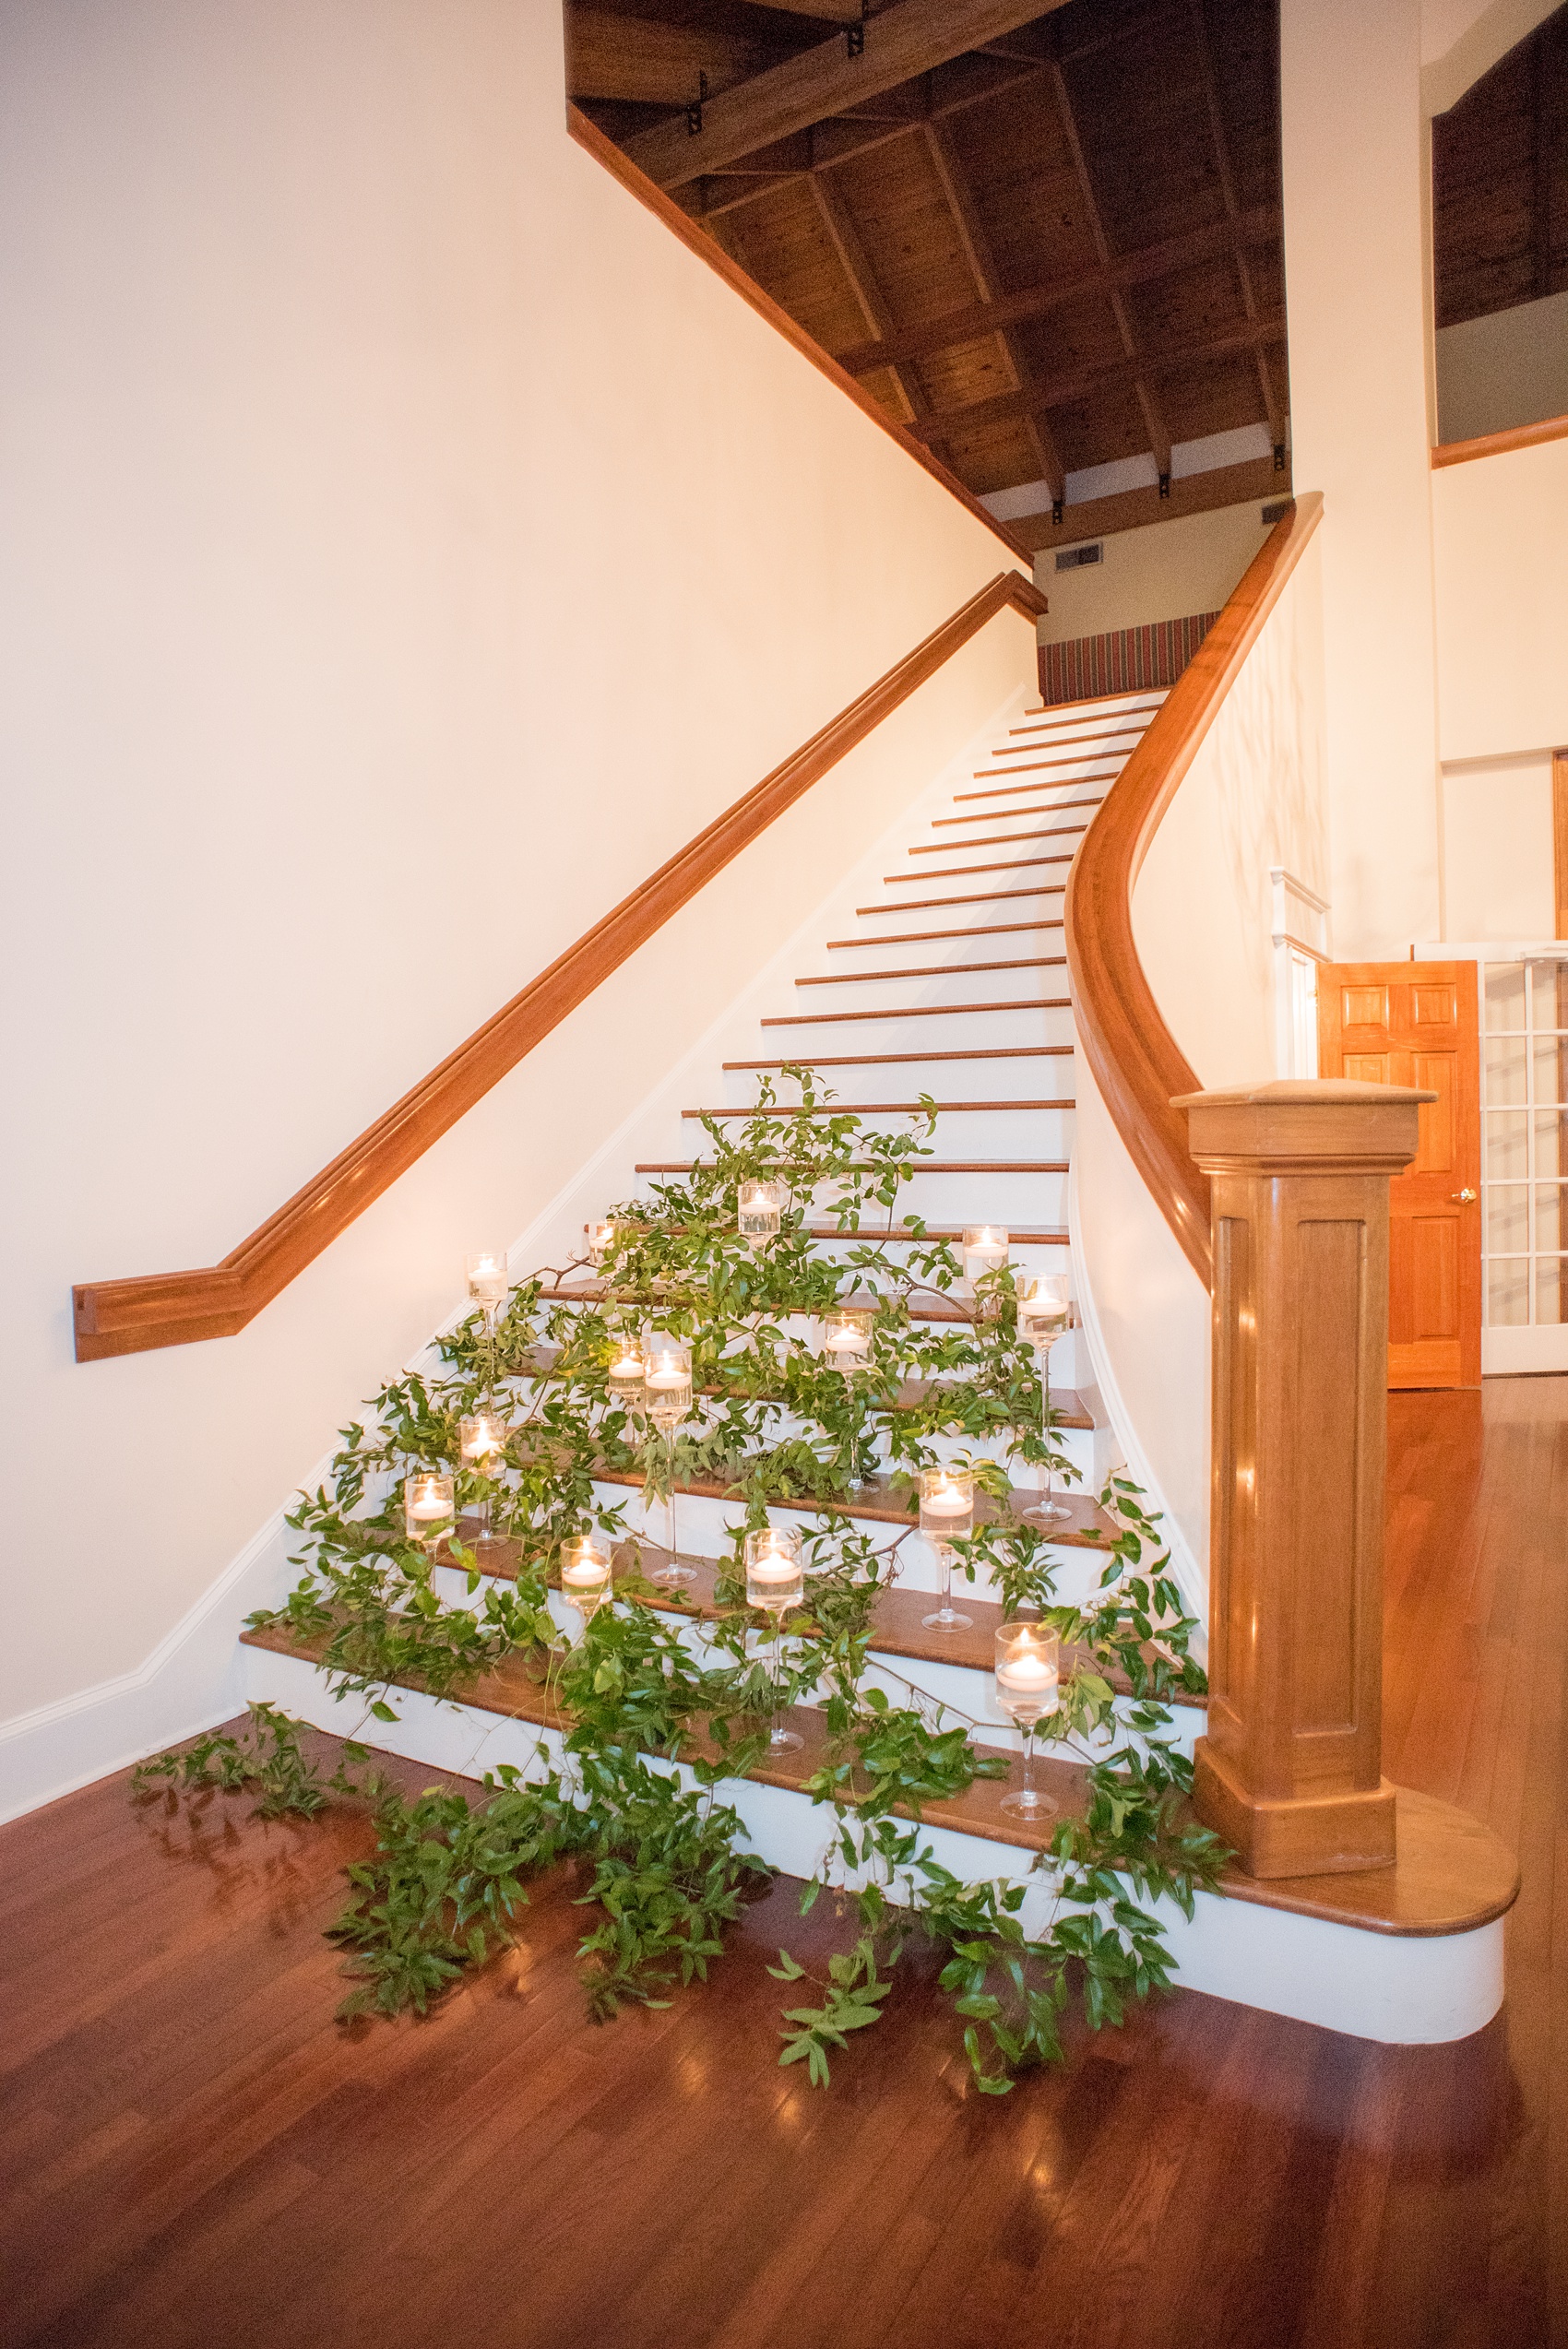 A fall wedding with burgundy, dusty rose and grey details. Candles and greenery lined the two staircases framing the reception room French doors when you walked into the venue. Mikkel Paige Photography, photographer in Greenville NC and Raleigh, captured this wedding at Rock Springs Center, planned by @vivalevent. Click through for more details and pictures from their day! #mikkelpaige #northcarolinawedding #southernwedding #weddingreception #burgundywedding #candlelight #prettystairs